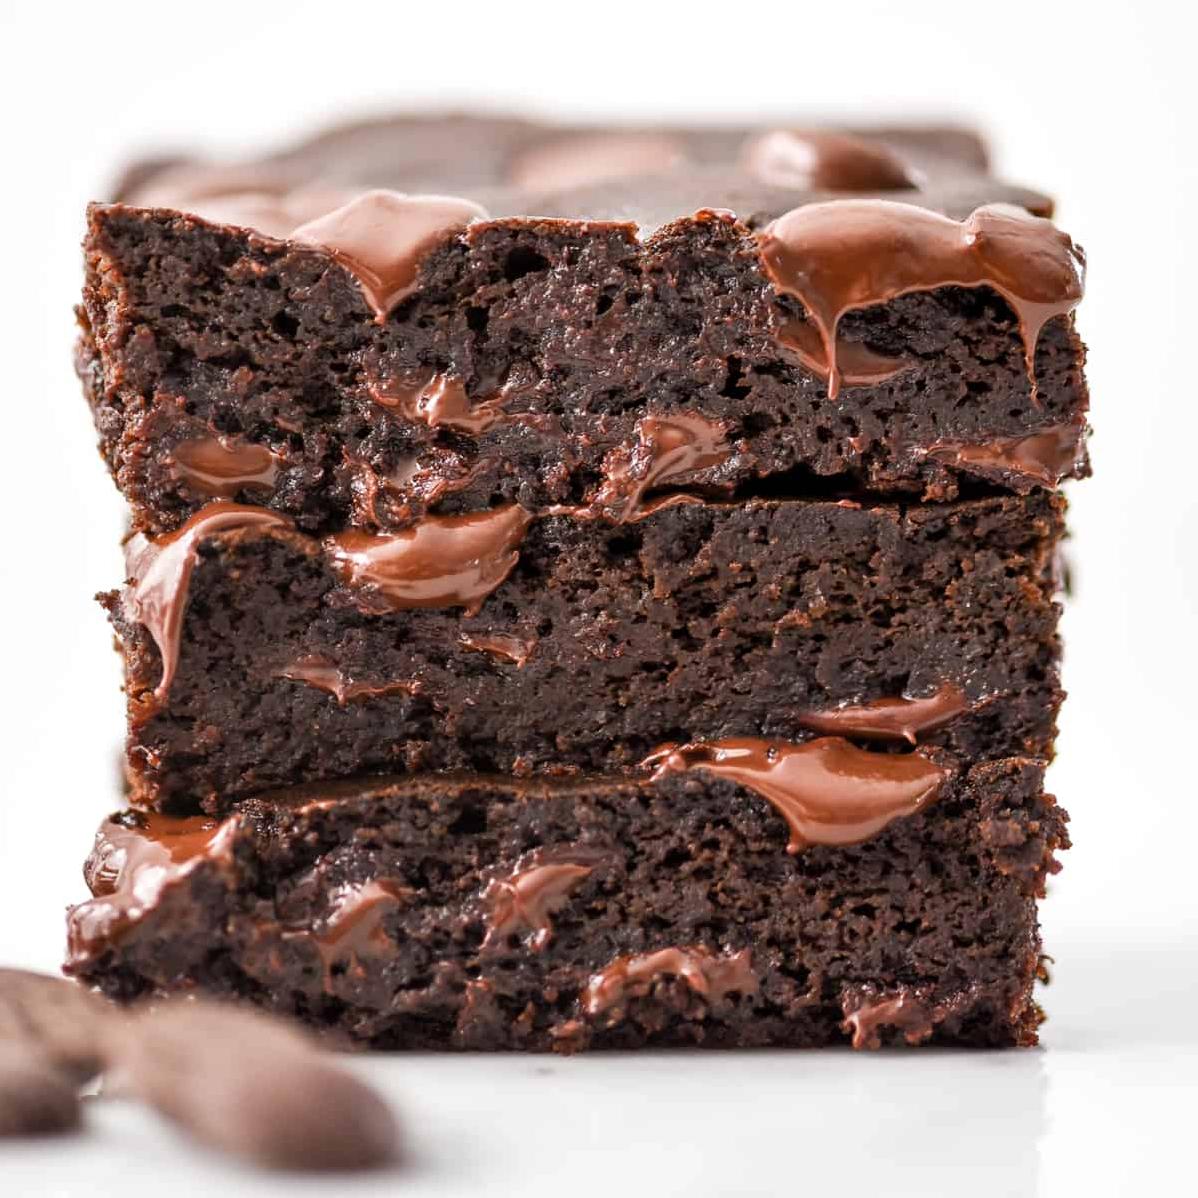  These brownies are perfect for satisfying sweet cravings without compromising your healthy diet.